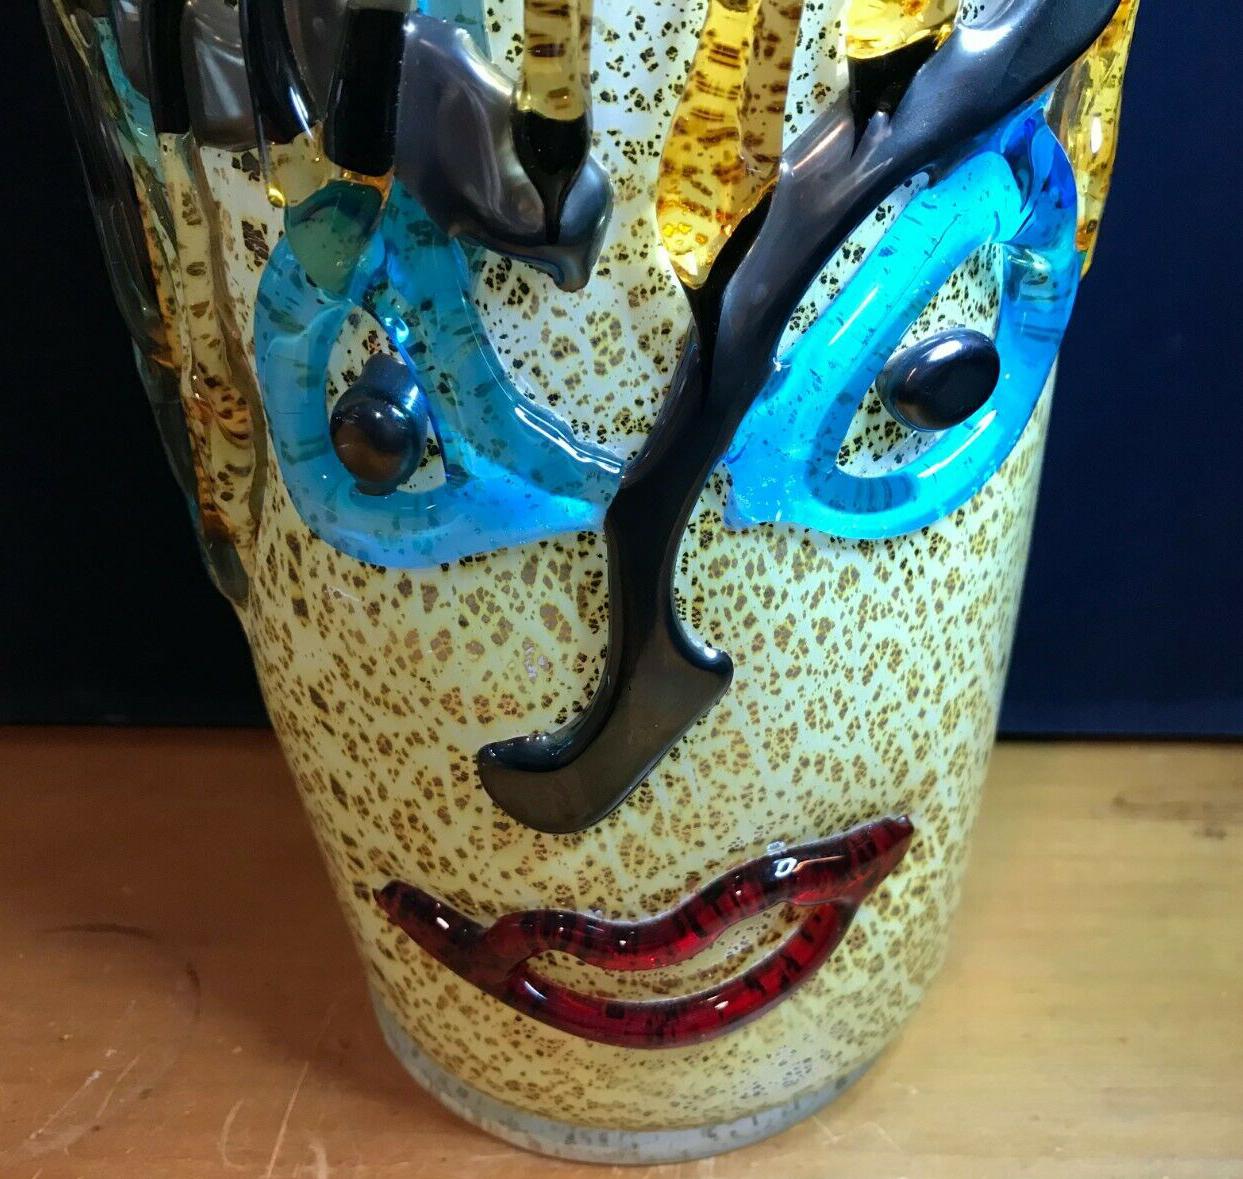 Mid-Century Modern large Murano art glass flamboyant face vase, signed by Sergio Constantini. A top quality art glass with an amazing display of multi colored reflection when the light hits the glass example, the color can appear to be more intense